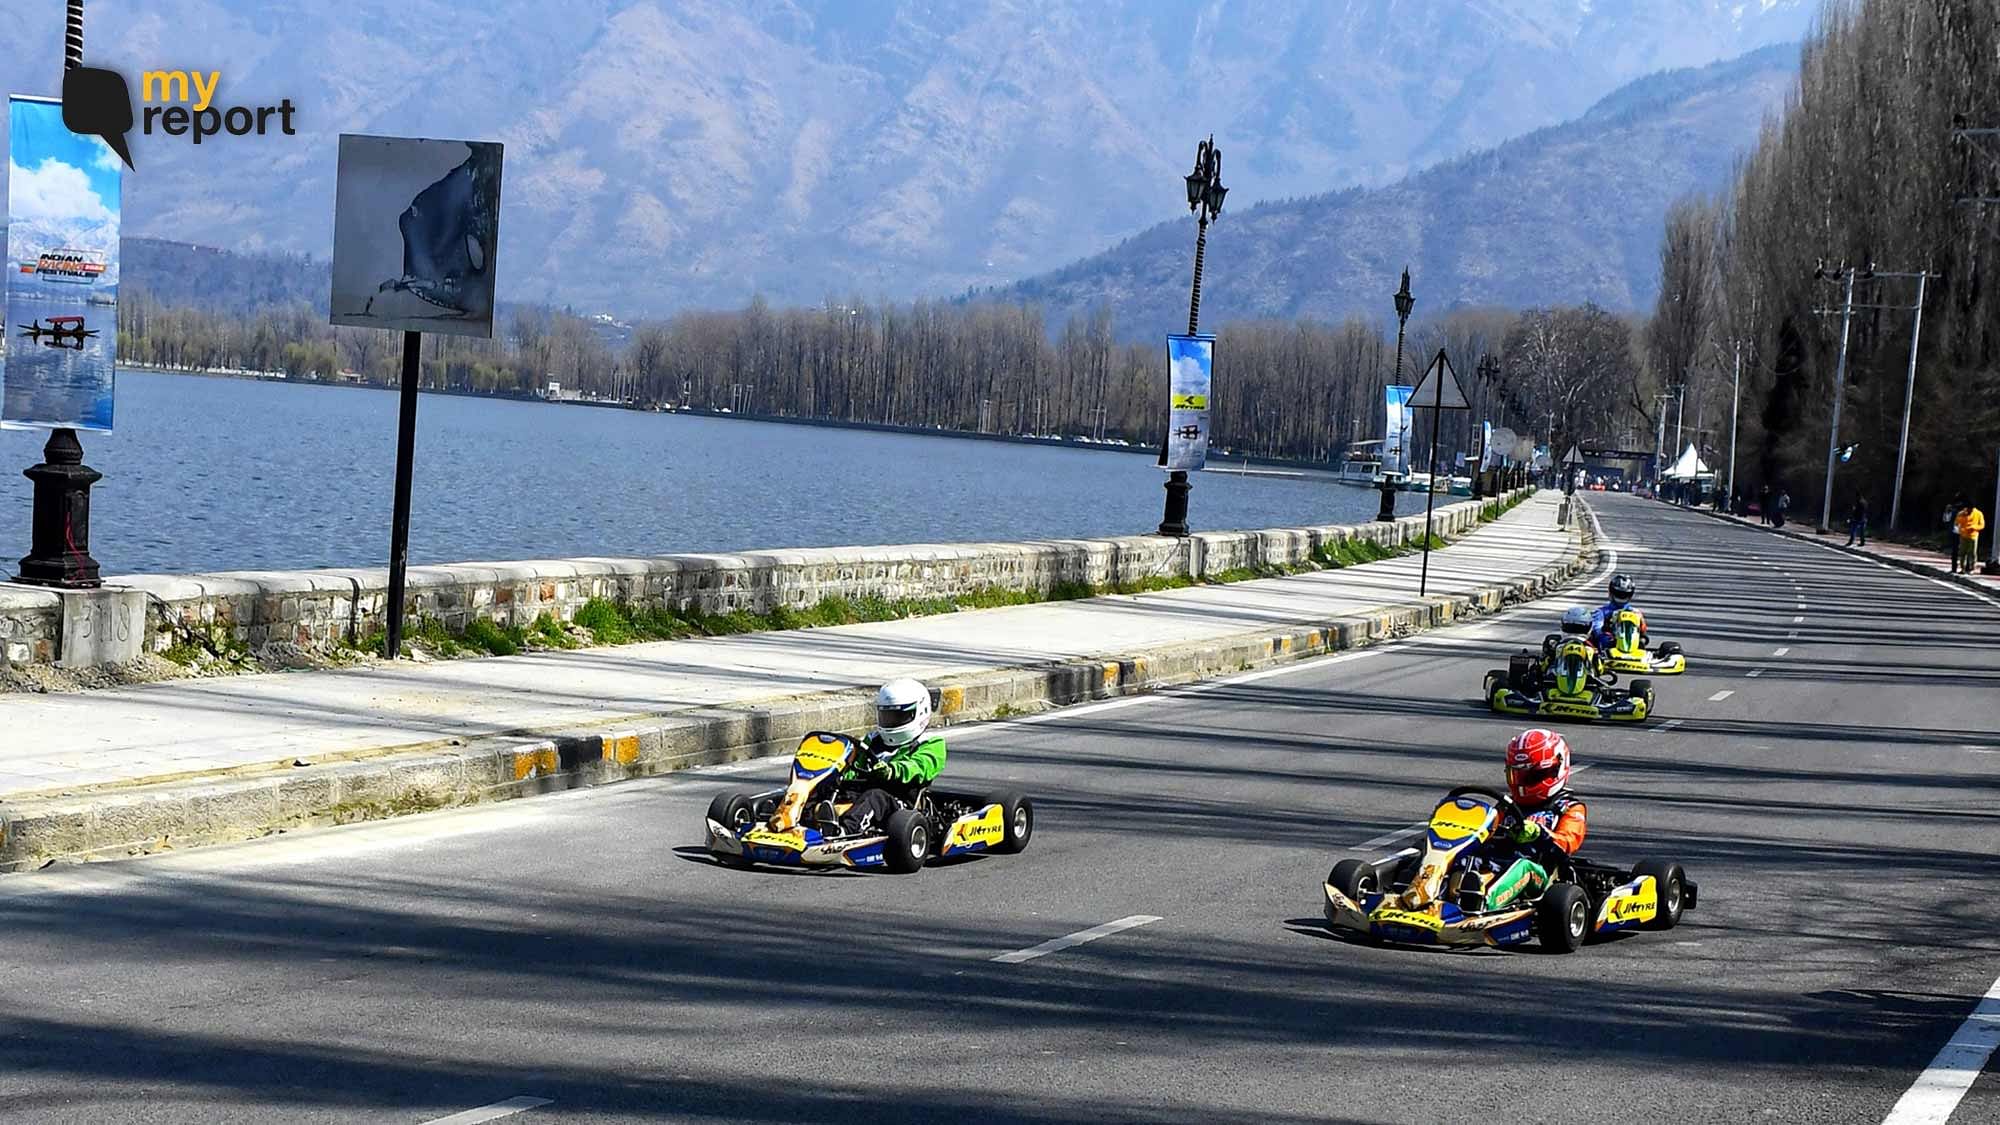 <div class="paragraphs"><p>On 17 March, Srinagar hosted the first-ever Formula 4 racing demonstration in Kashmir. Hundreds of enthusiasts lined the picturesque Boulevard road near Dal Lake.</p></div>